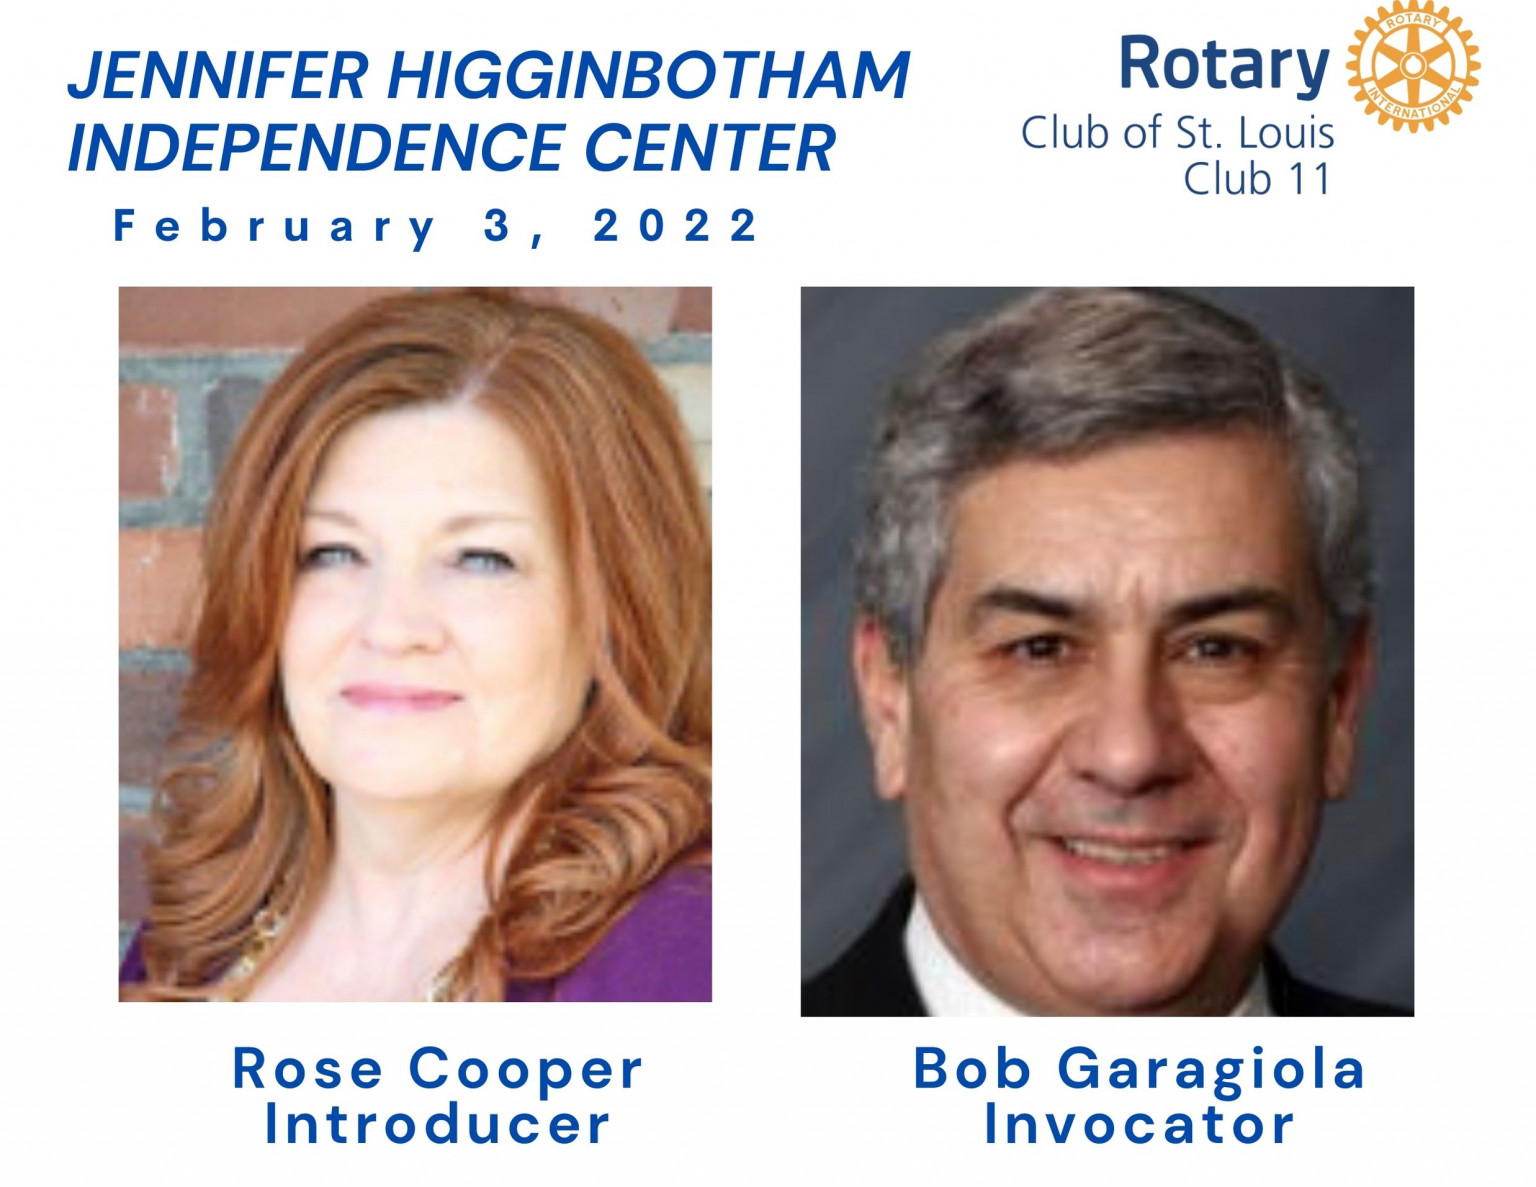 Rose Cooper, Introducer and Bob Garagiola, Invocator for our St. Louis Rotary Club meeting on 2/3/22. ZOOM ONLY